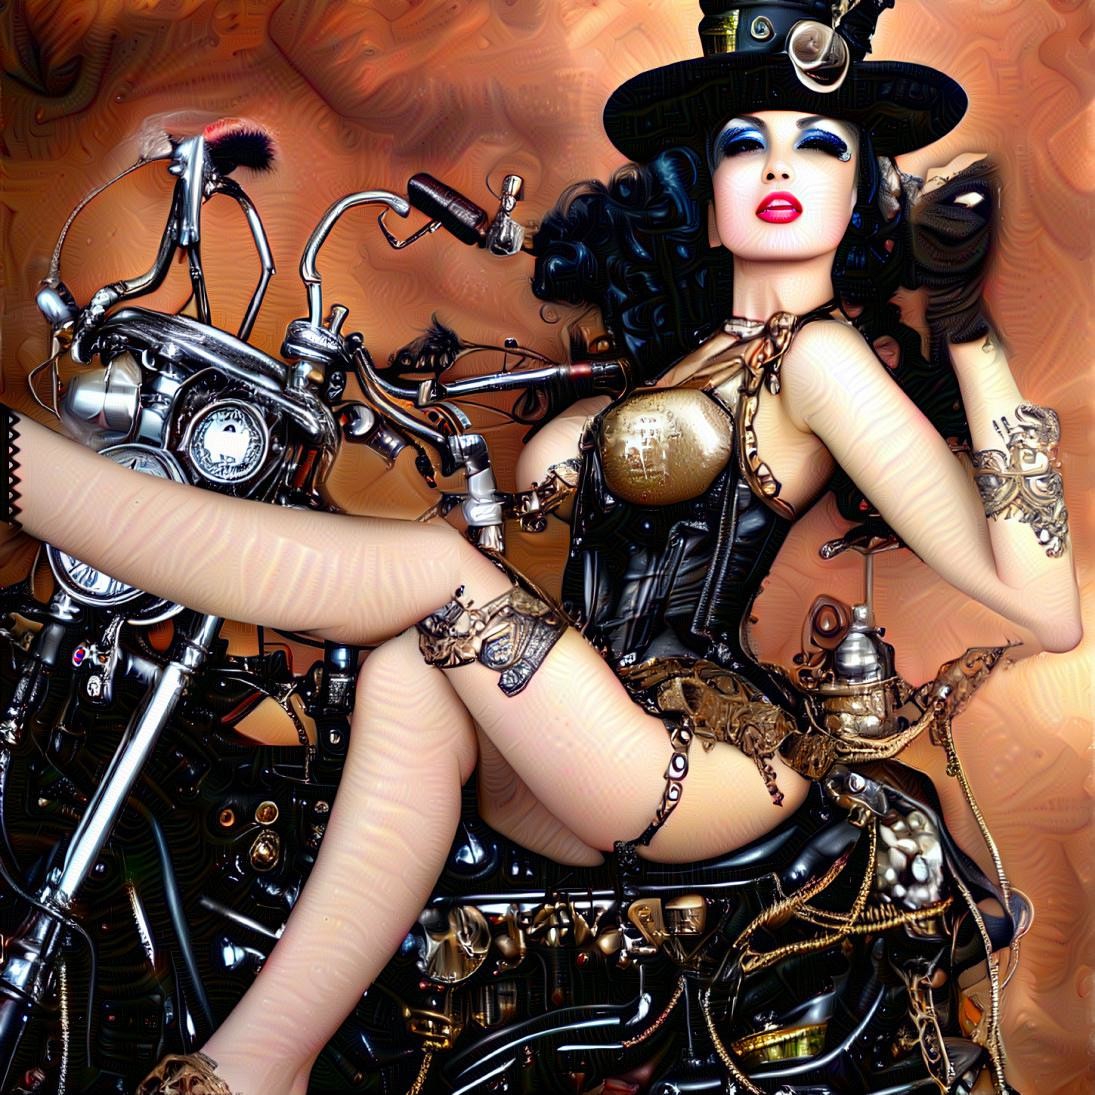 Woman on Harley in Leather Corset